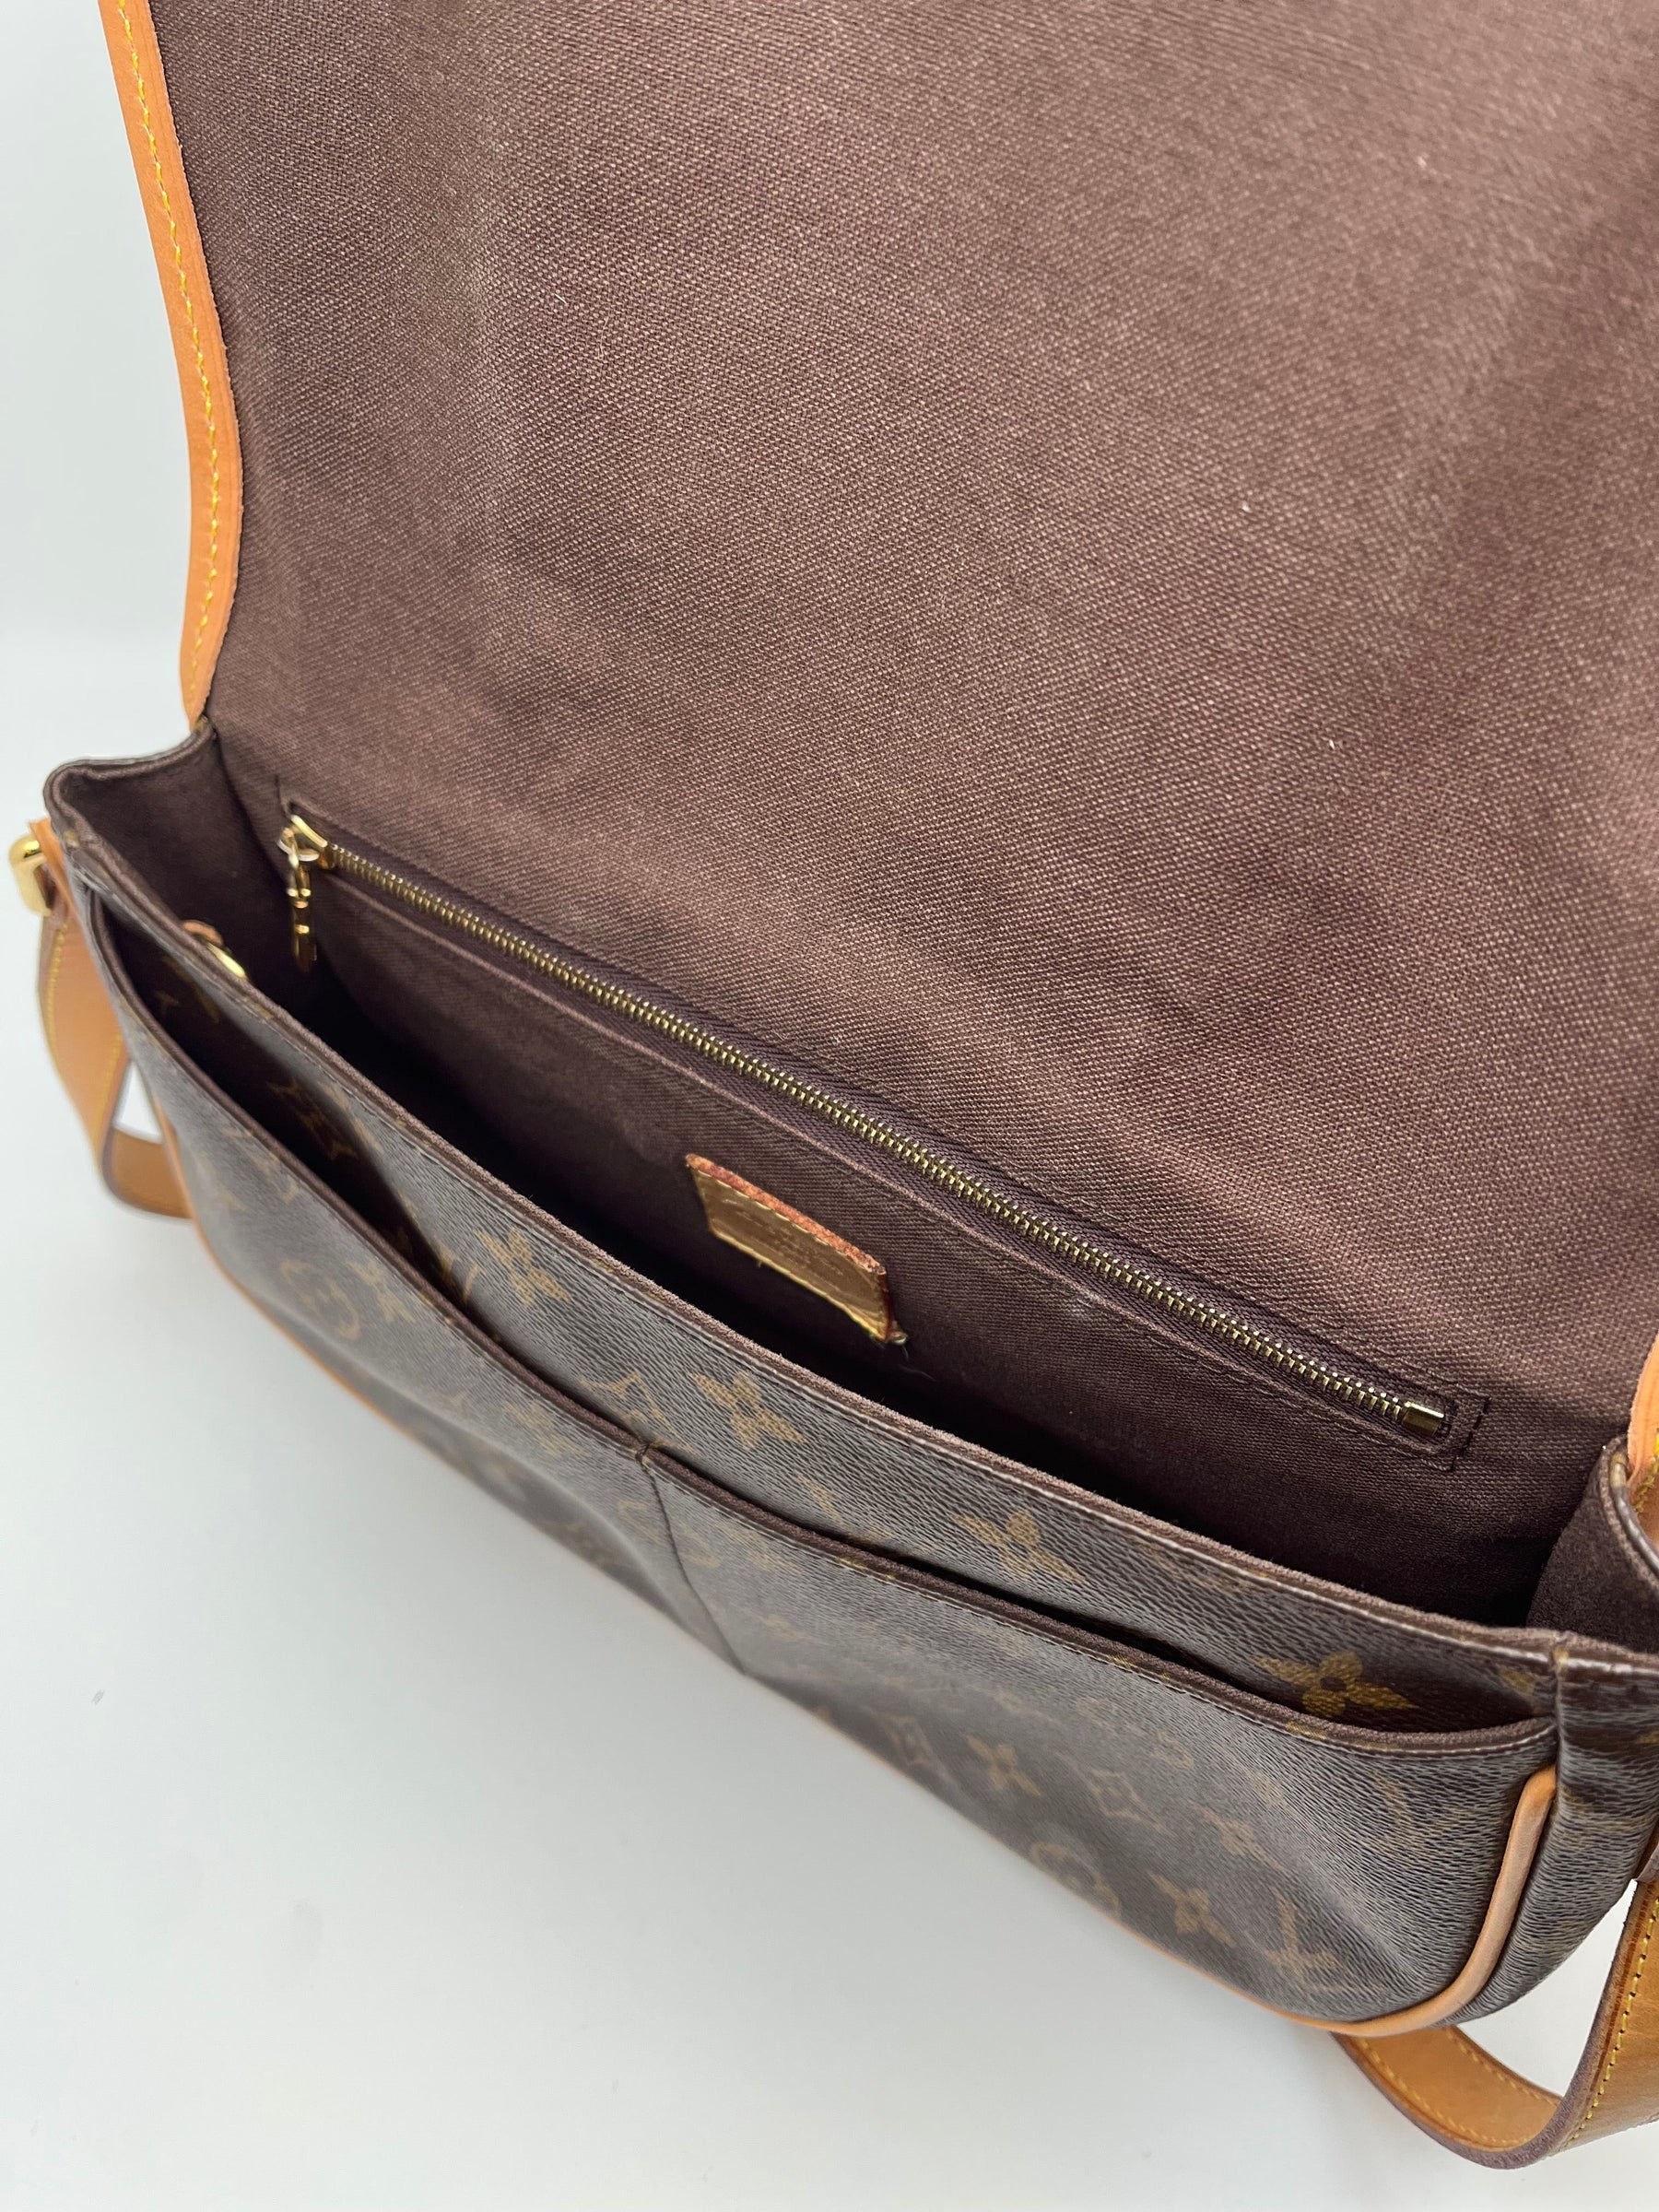 Louis Vuitton Menilmontant with Brown Monogram, brass hardware, and leather trim. Canvas interior with three interior pockets and magnetic closure. Great condition